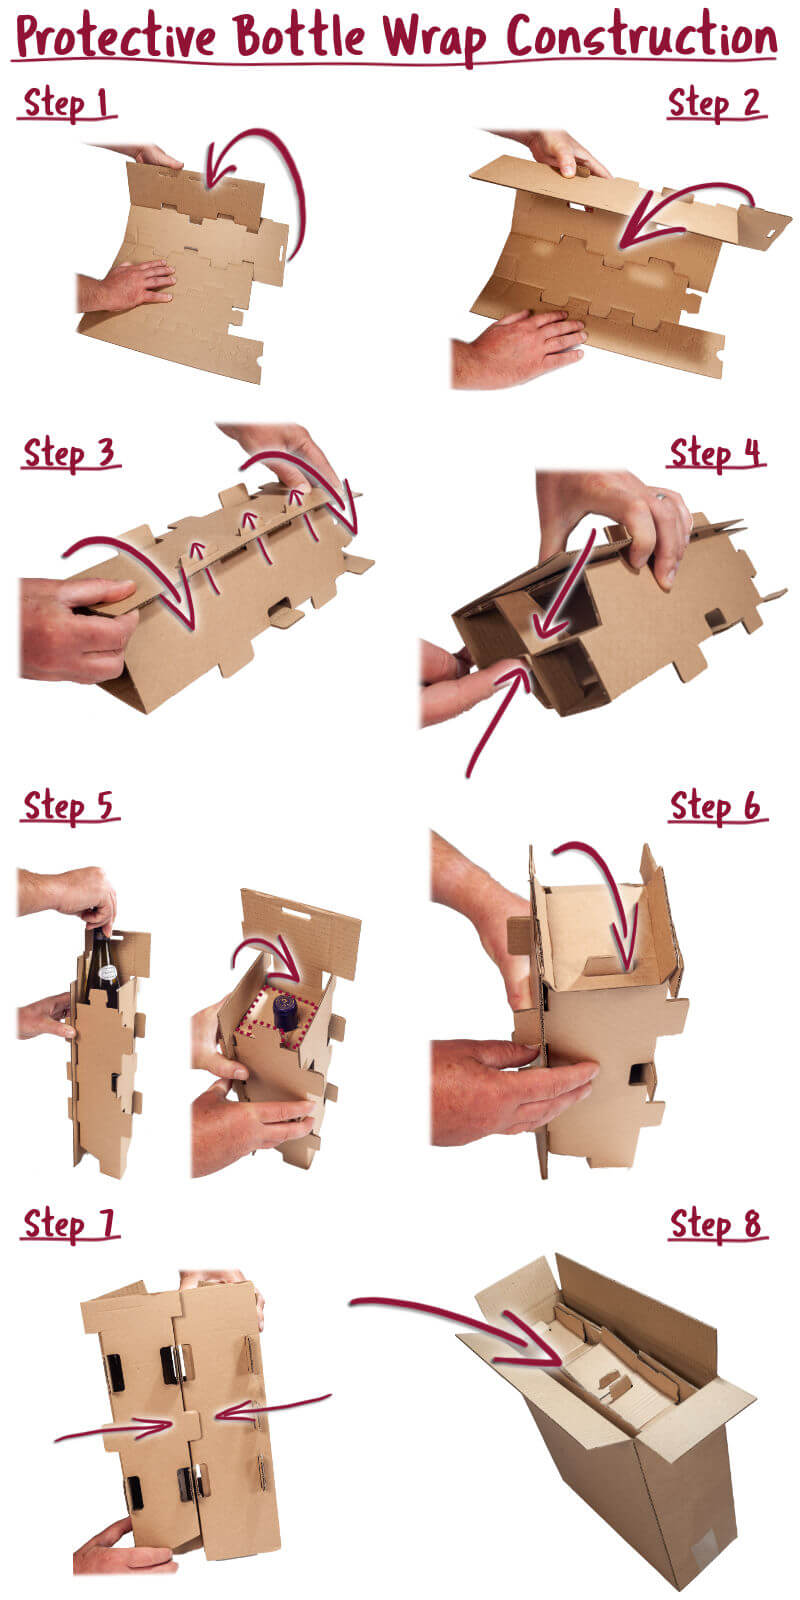 Visual Instructions on how to fold the included protective bottle wrap inserts